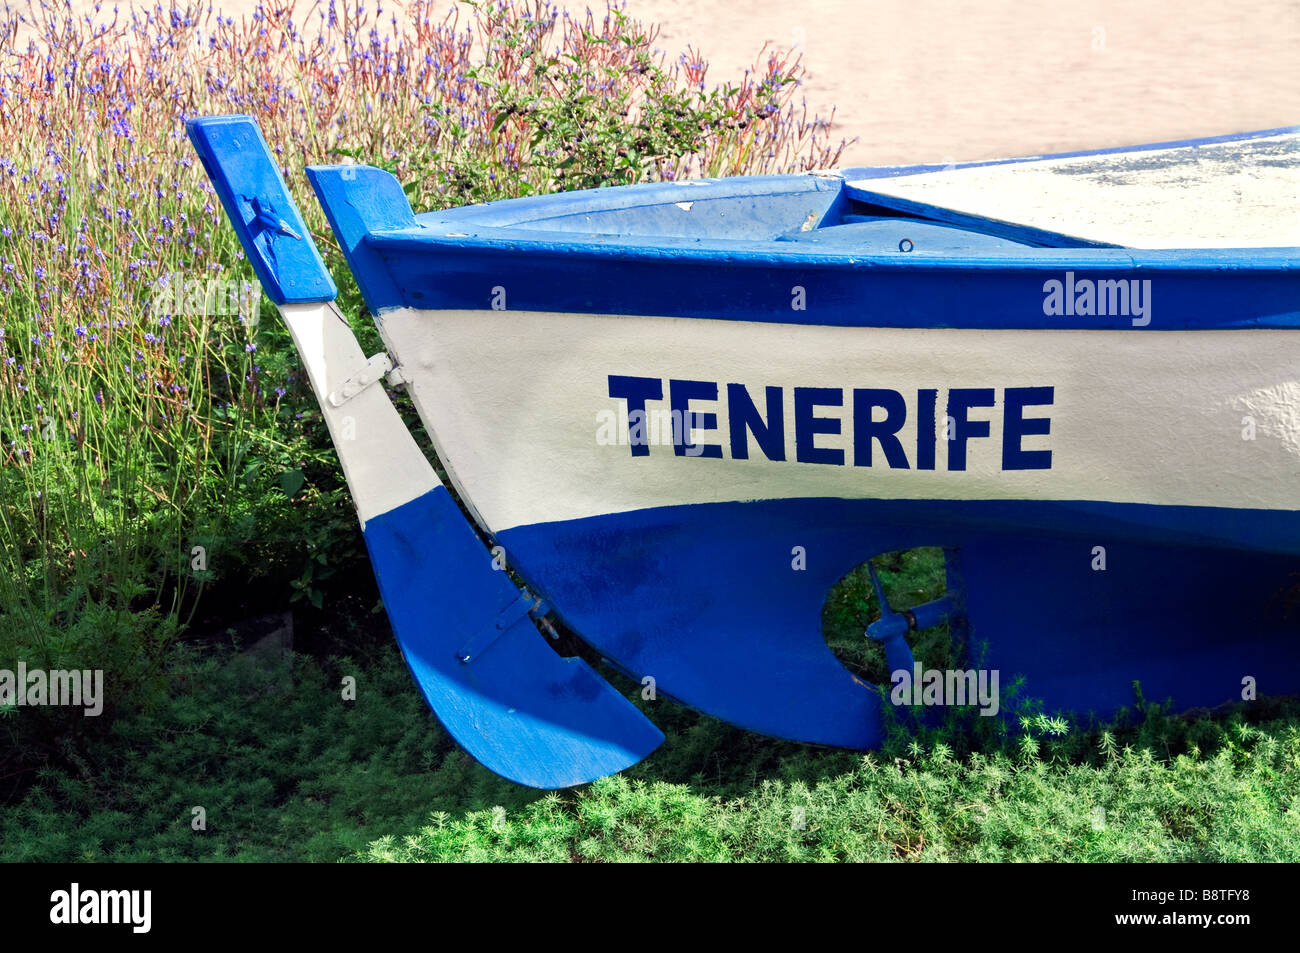 Feature traditional wooden fishing boat named 'Tenerife' lying on Los Cristianos beach Tenerife Canary Islands Spain Stock Photo